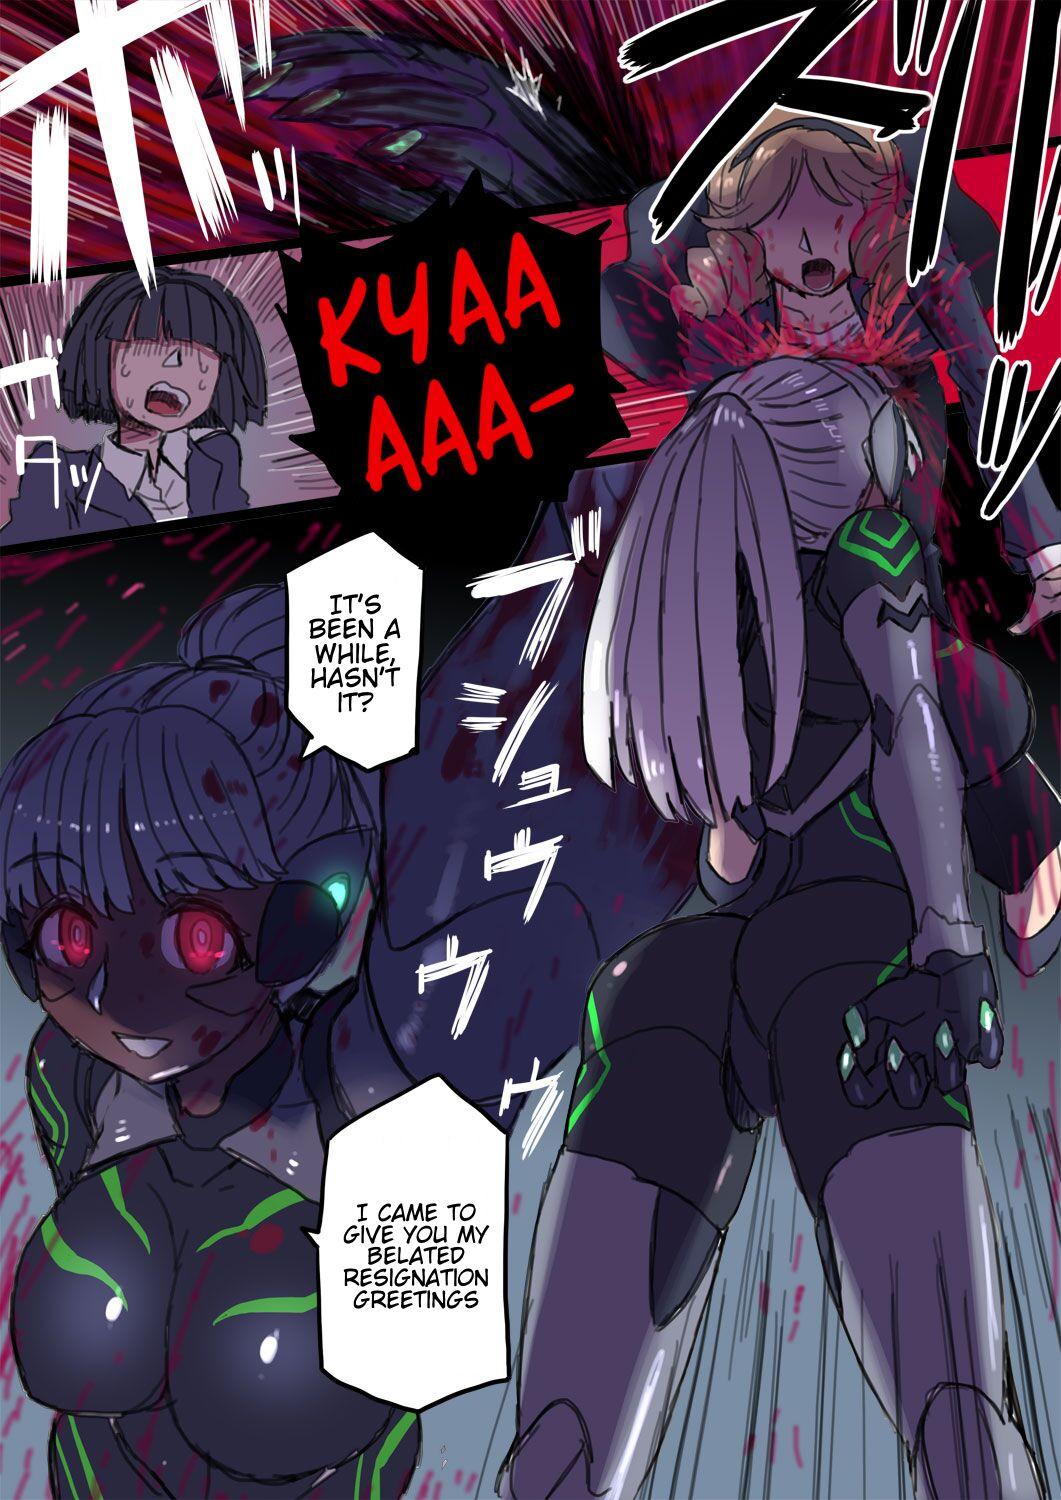 Big Dick Ijimerarete Ita OL ga Aku no Cyborg Senshi e to Kaizou Sare Fukushuu o Togeru | The Office Lady that was Bullied is Remodelled into an Evil Cyborg Soldier and Carries Out Revenge 8teen - Page 6